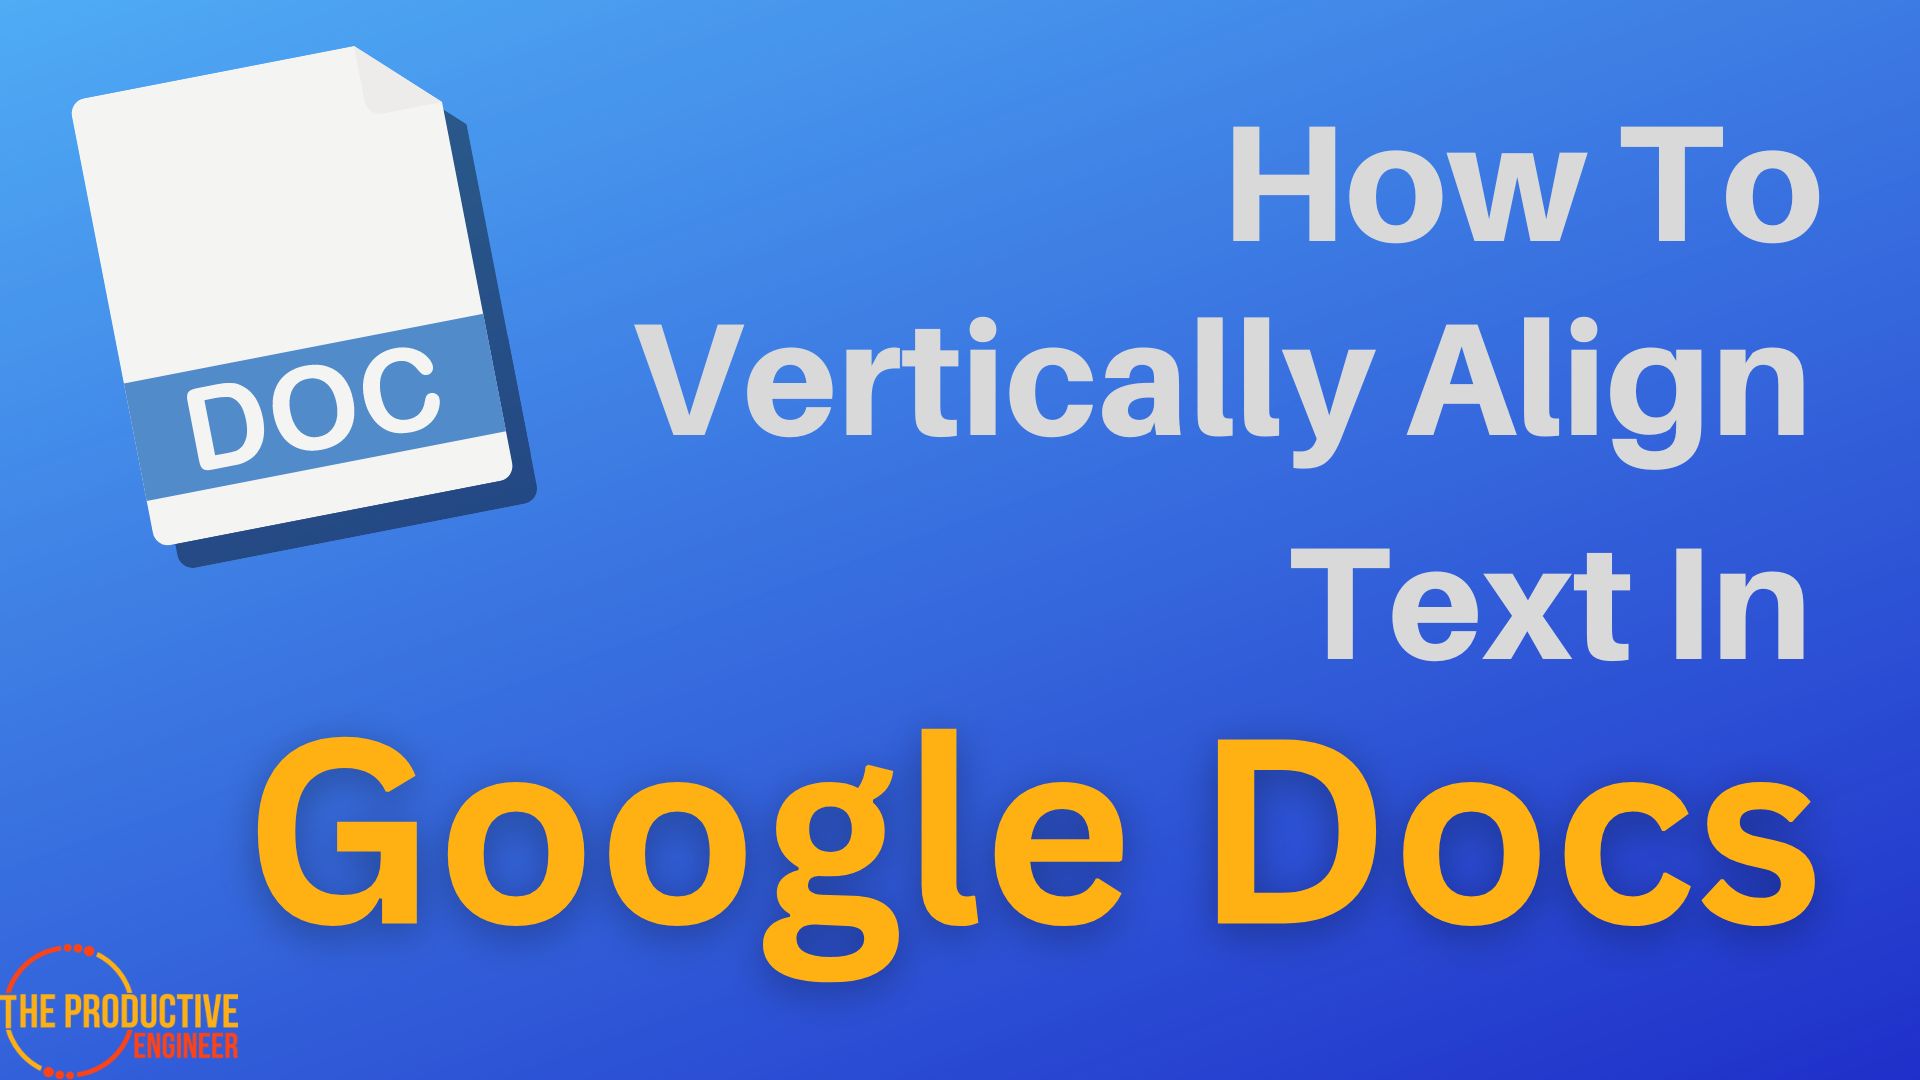 How To Vertically Align Text In Google Docs